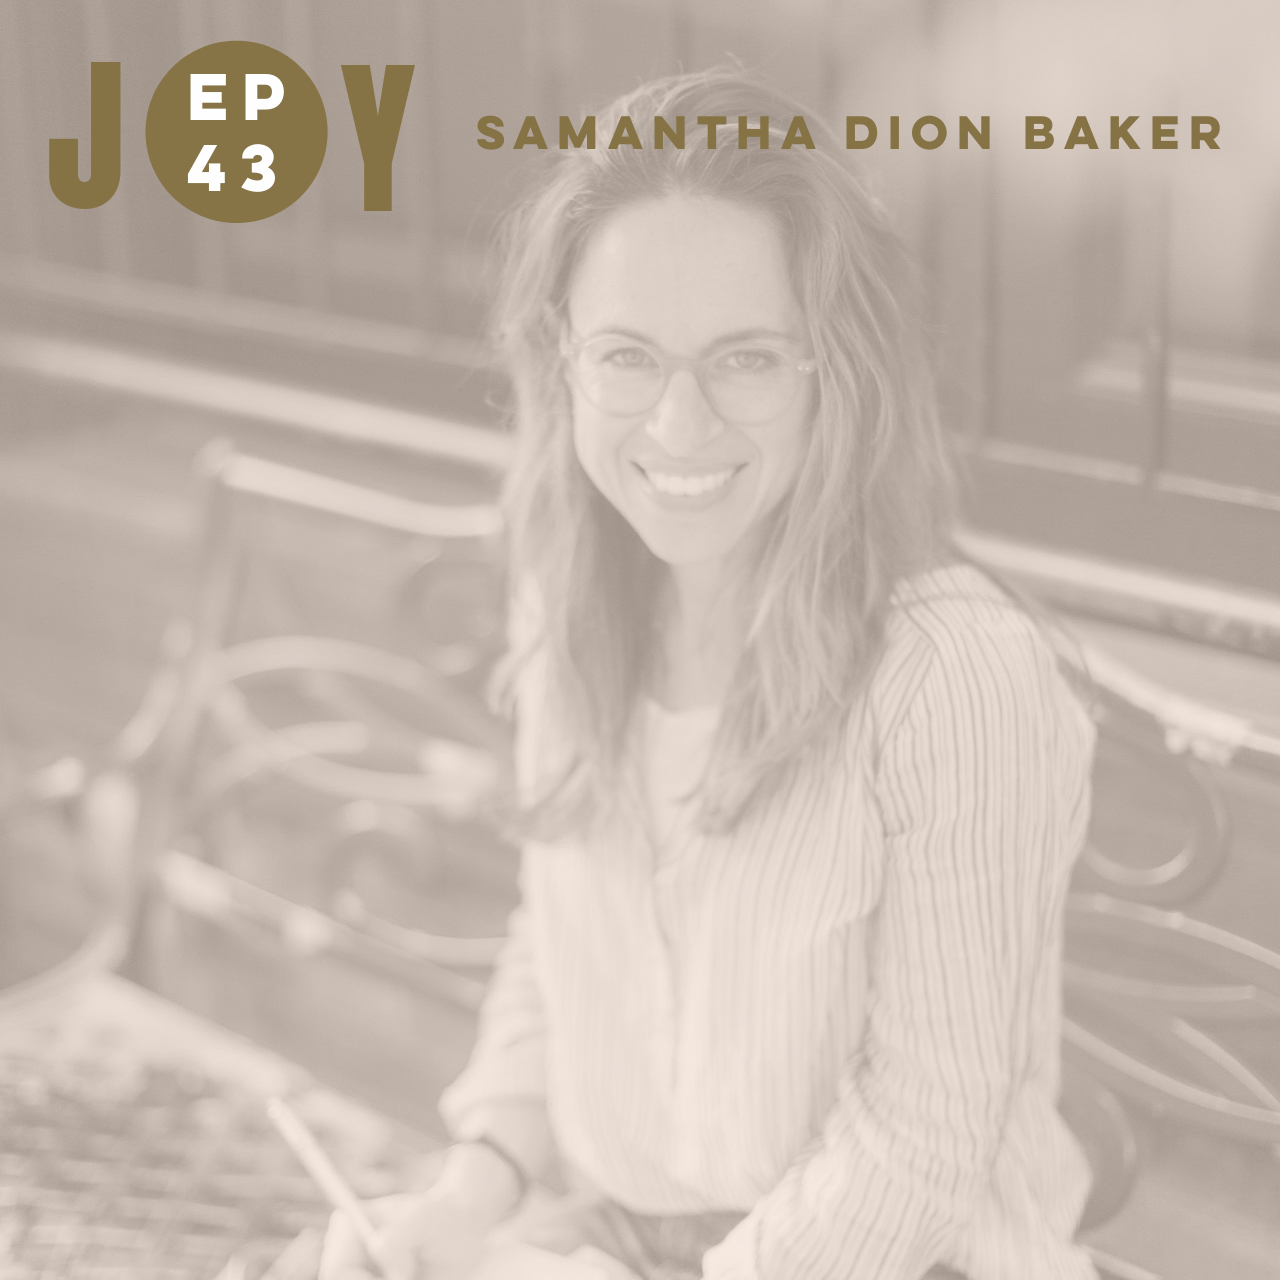 JOY IS NOW: LET'S TALK LOVE WITH SAMANTHA DION BAKER